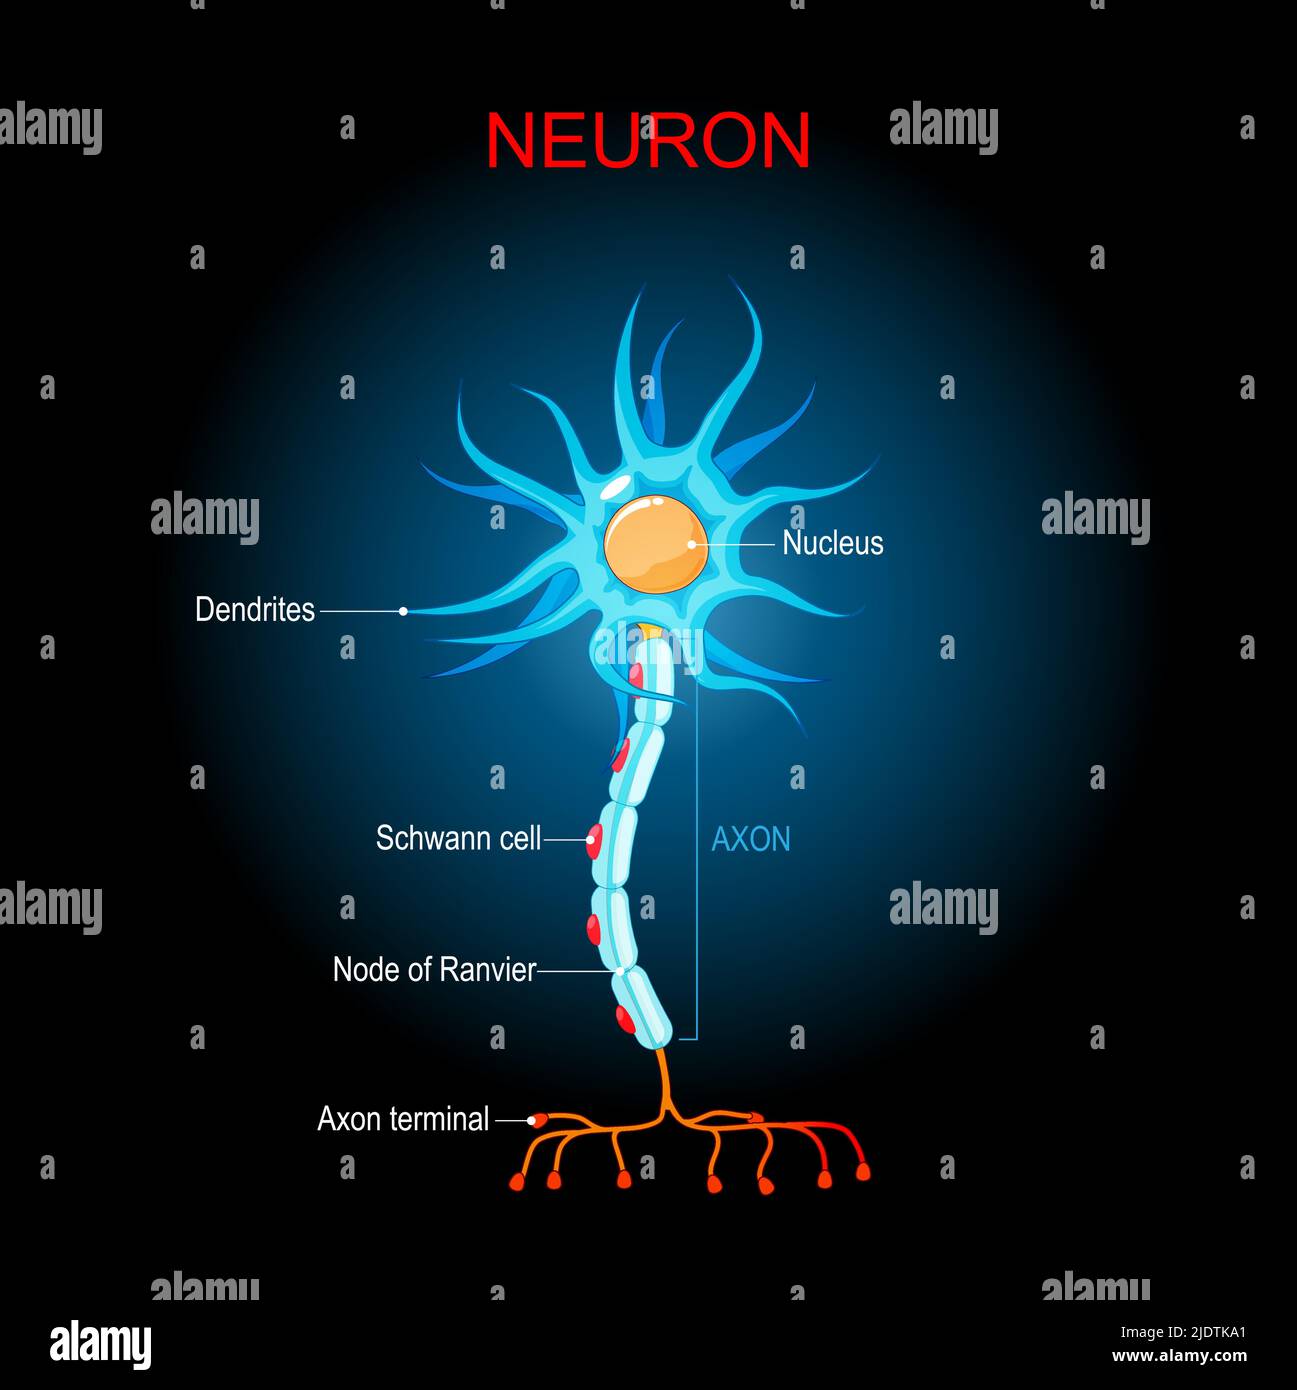 brain neuron Structure. Biological Anatomy of neuron cell. cell body, dendrites, and a single axon. neuron on dark background. vector diagram Stock Vector